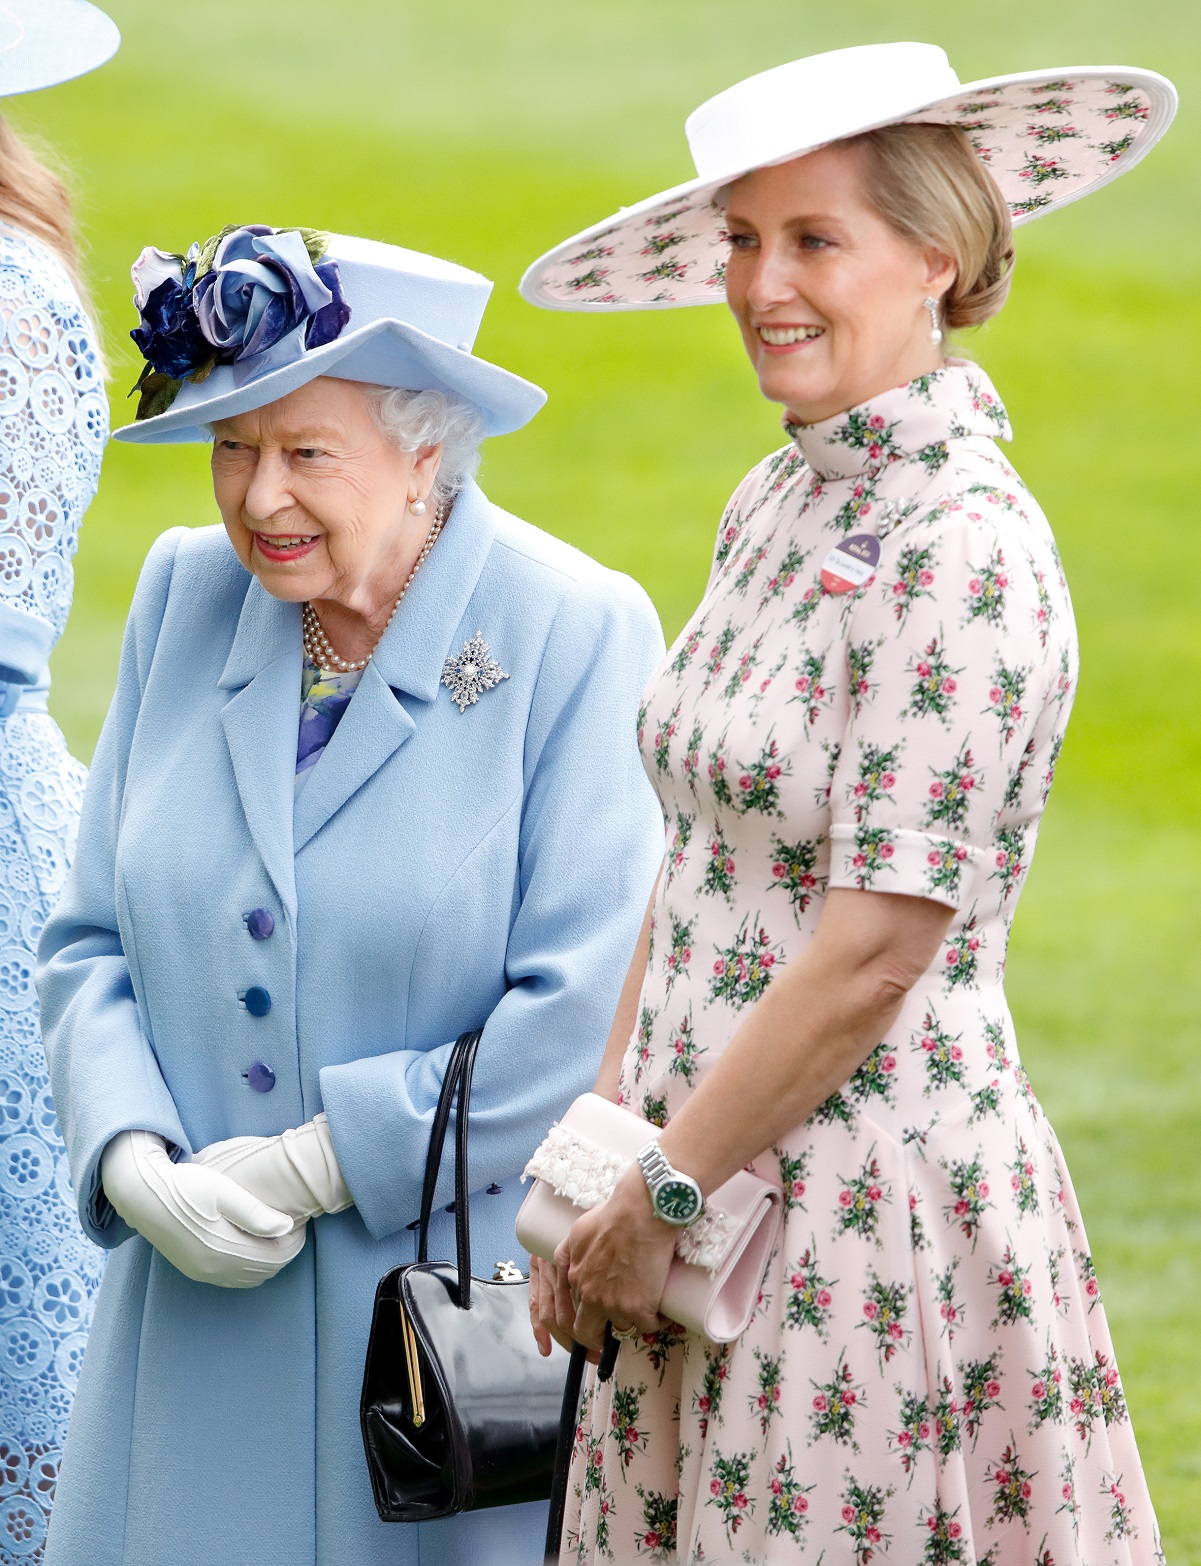 Queen Elizabeth II and Sophie, Countess of Wessex attend day one of Royal Ascot at Ascot Racecourse together